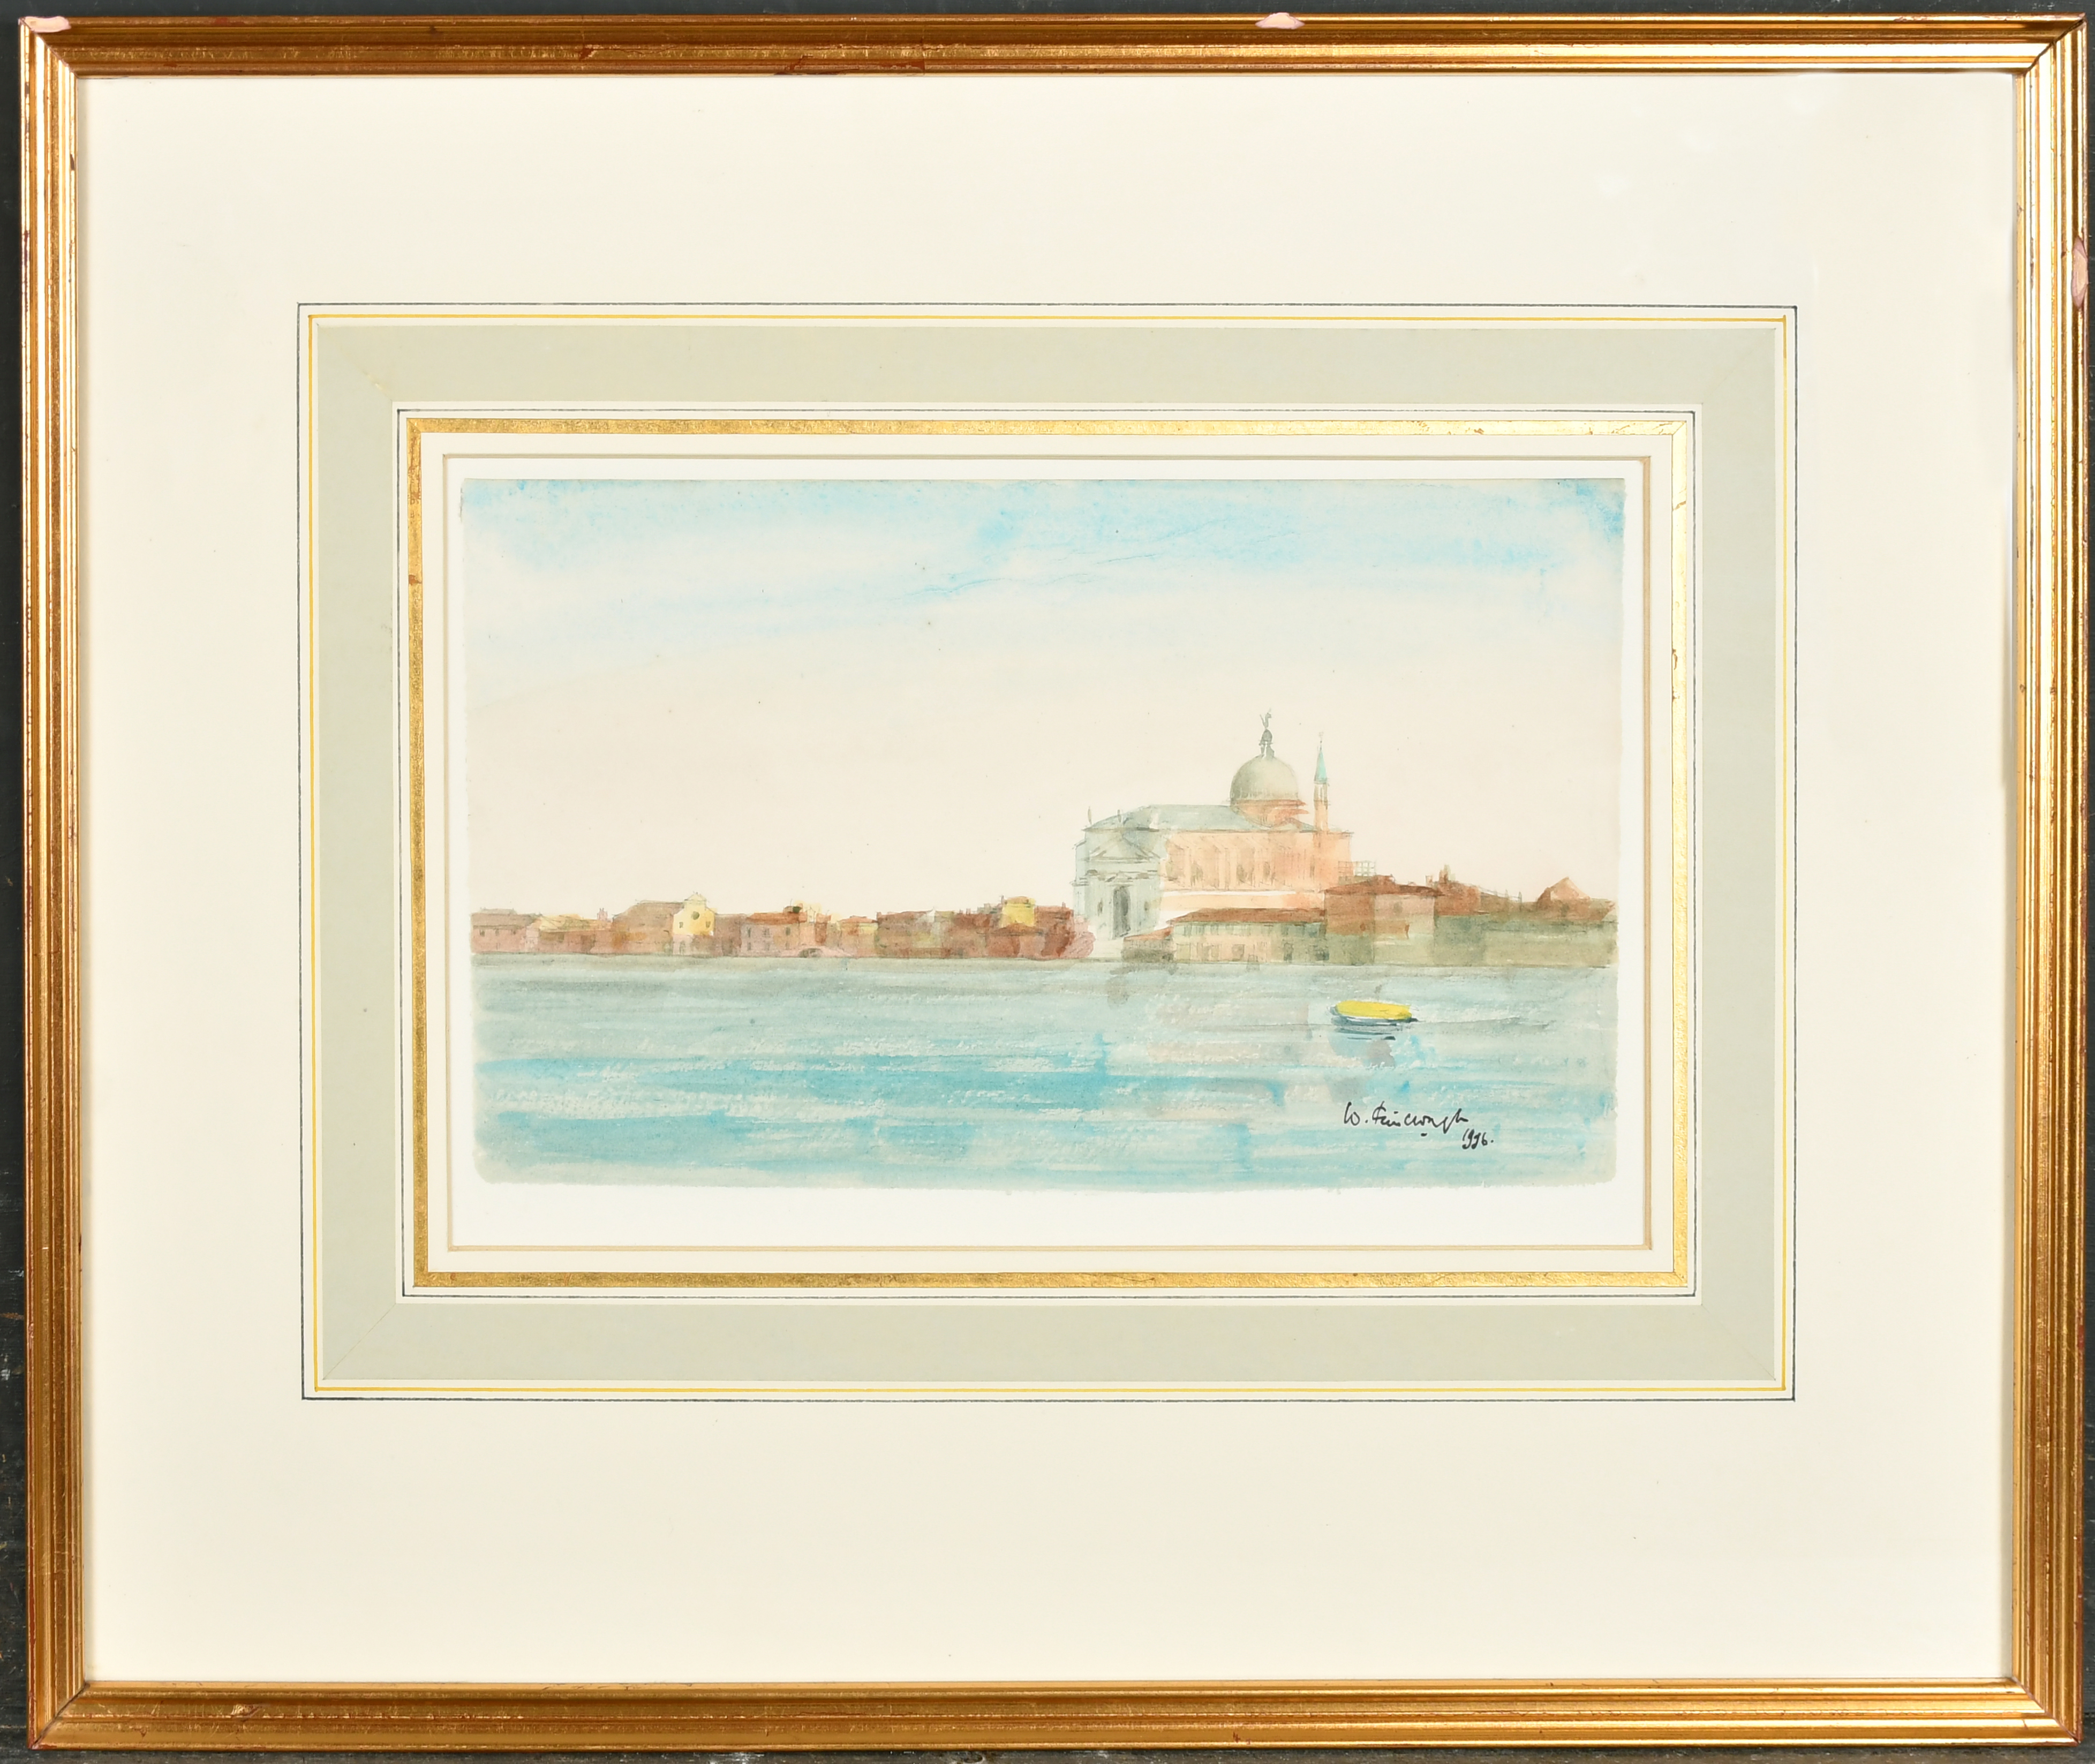 Wilfred Fairclough (1907-1996) British. "Venice, Il Redentore", Watercolour, Signed and dated - Image 2 of 6